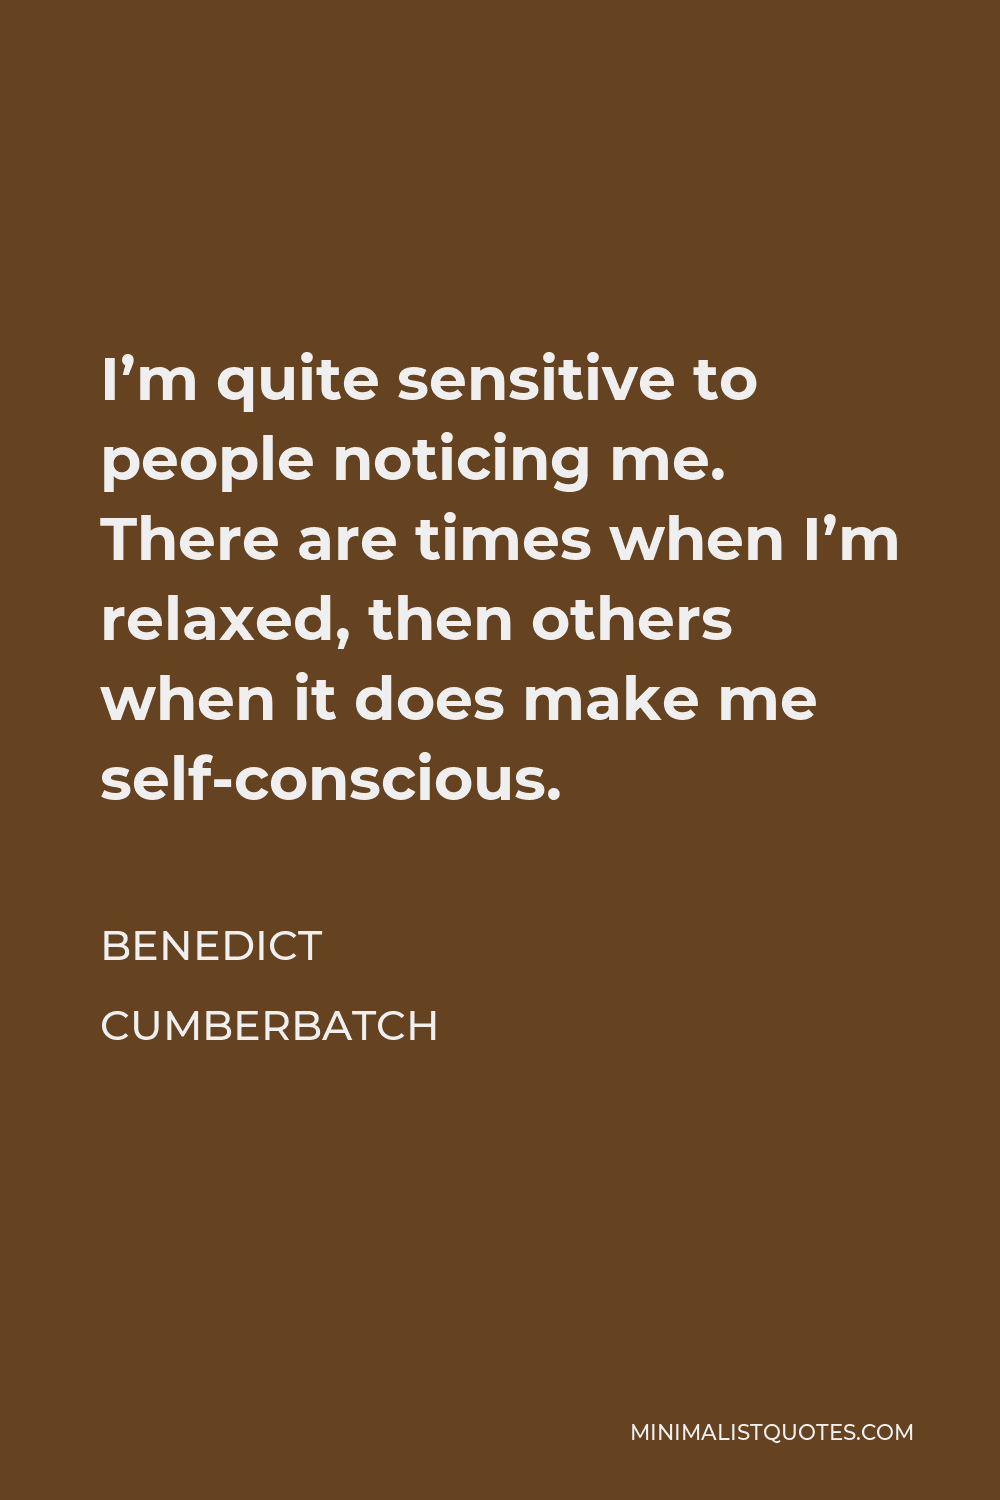 Benedict Cumberbatch Quote - I’m quite sensitive to people noticing me. There are times when I’m relaxed, then others when it does make me self-conscious.